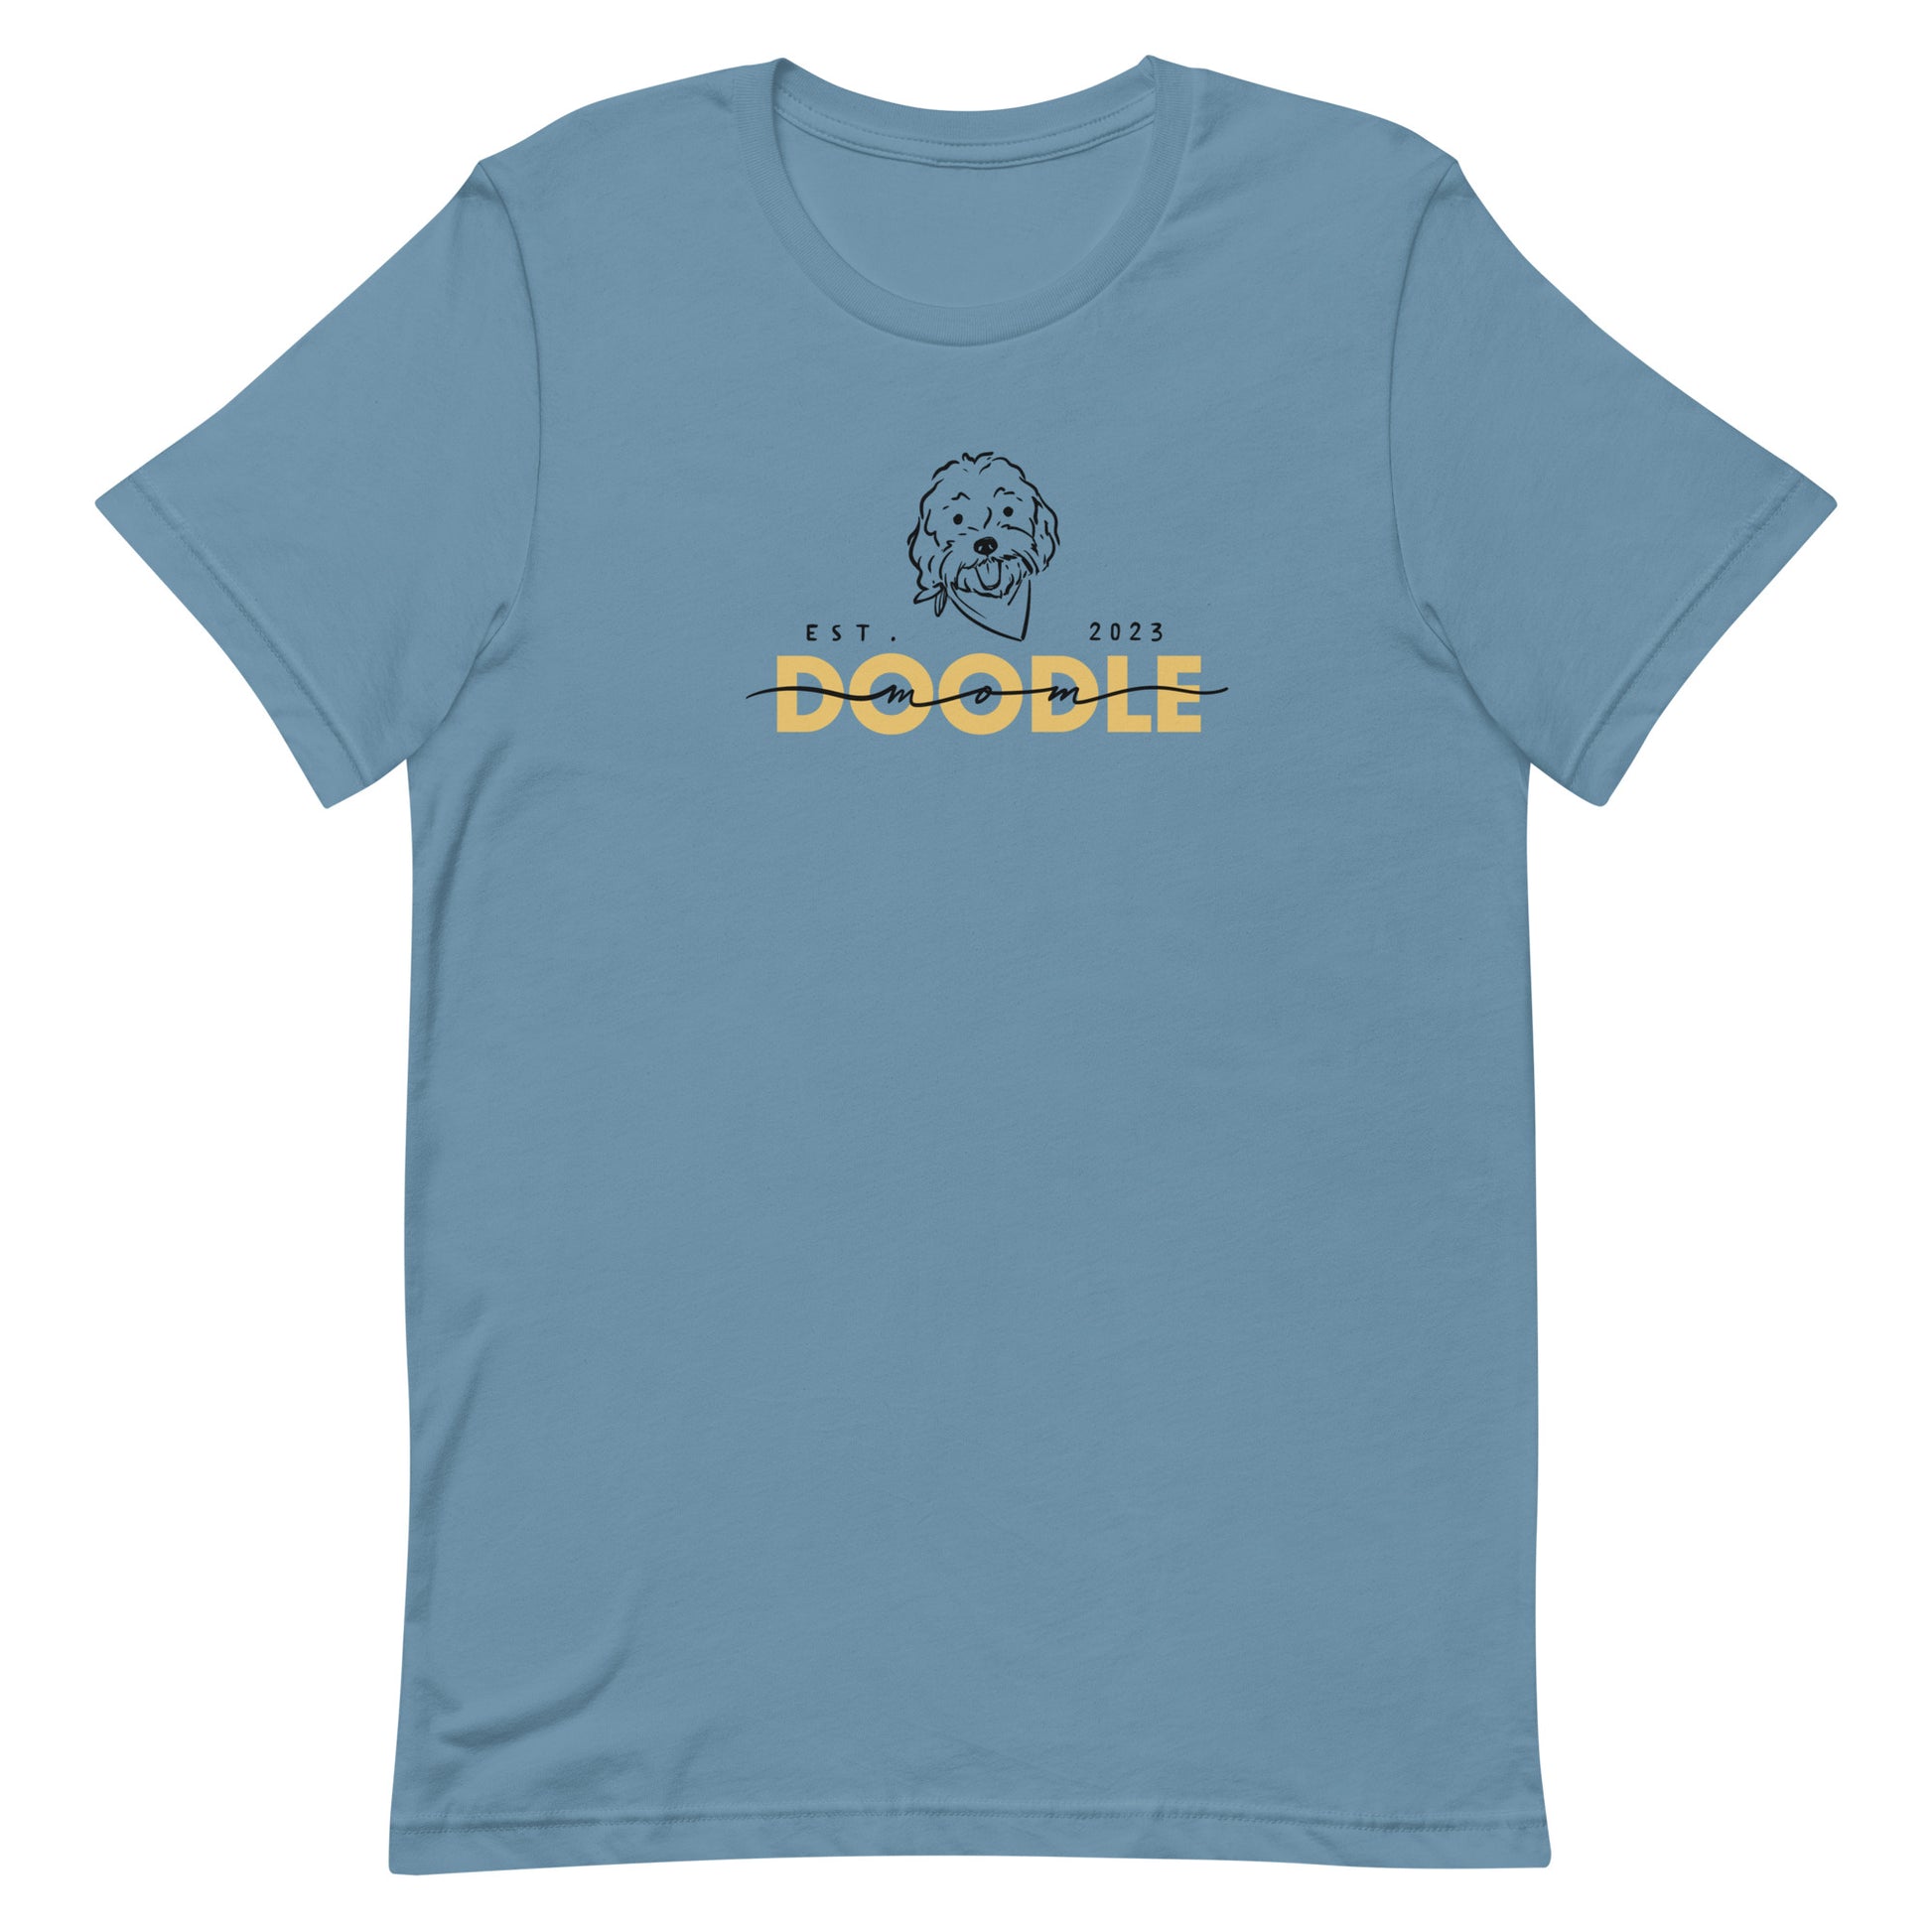 Goldendoodle Mom t-shirt with Goldendoodle face and words "Doodle Mom Est 2023" in steel blue  color